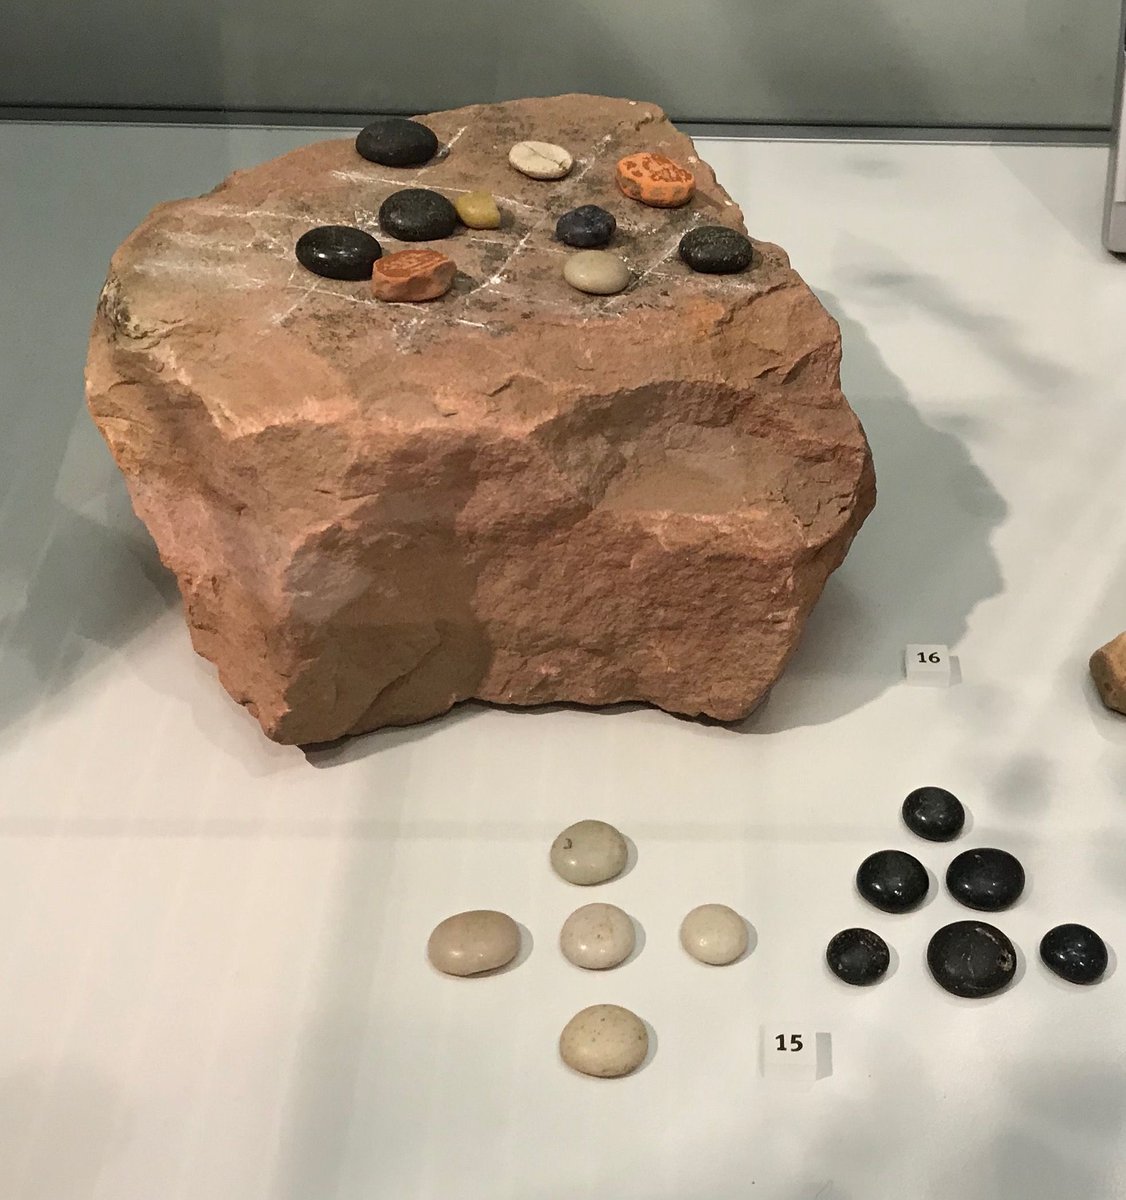 Some glass and pottery Roman gaming pieces, which were all found at #Trimontium, in the #ScottishBorders, dating to AD80-180. A favourite game played by soldiers was latrunculi (robbers) - like modern draughts & chess with different types of pieces that were moved around a board.